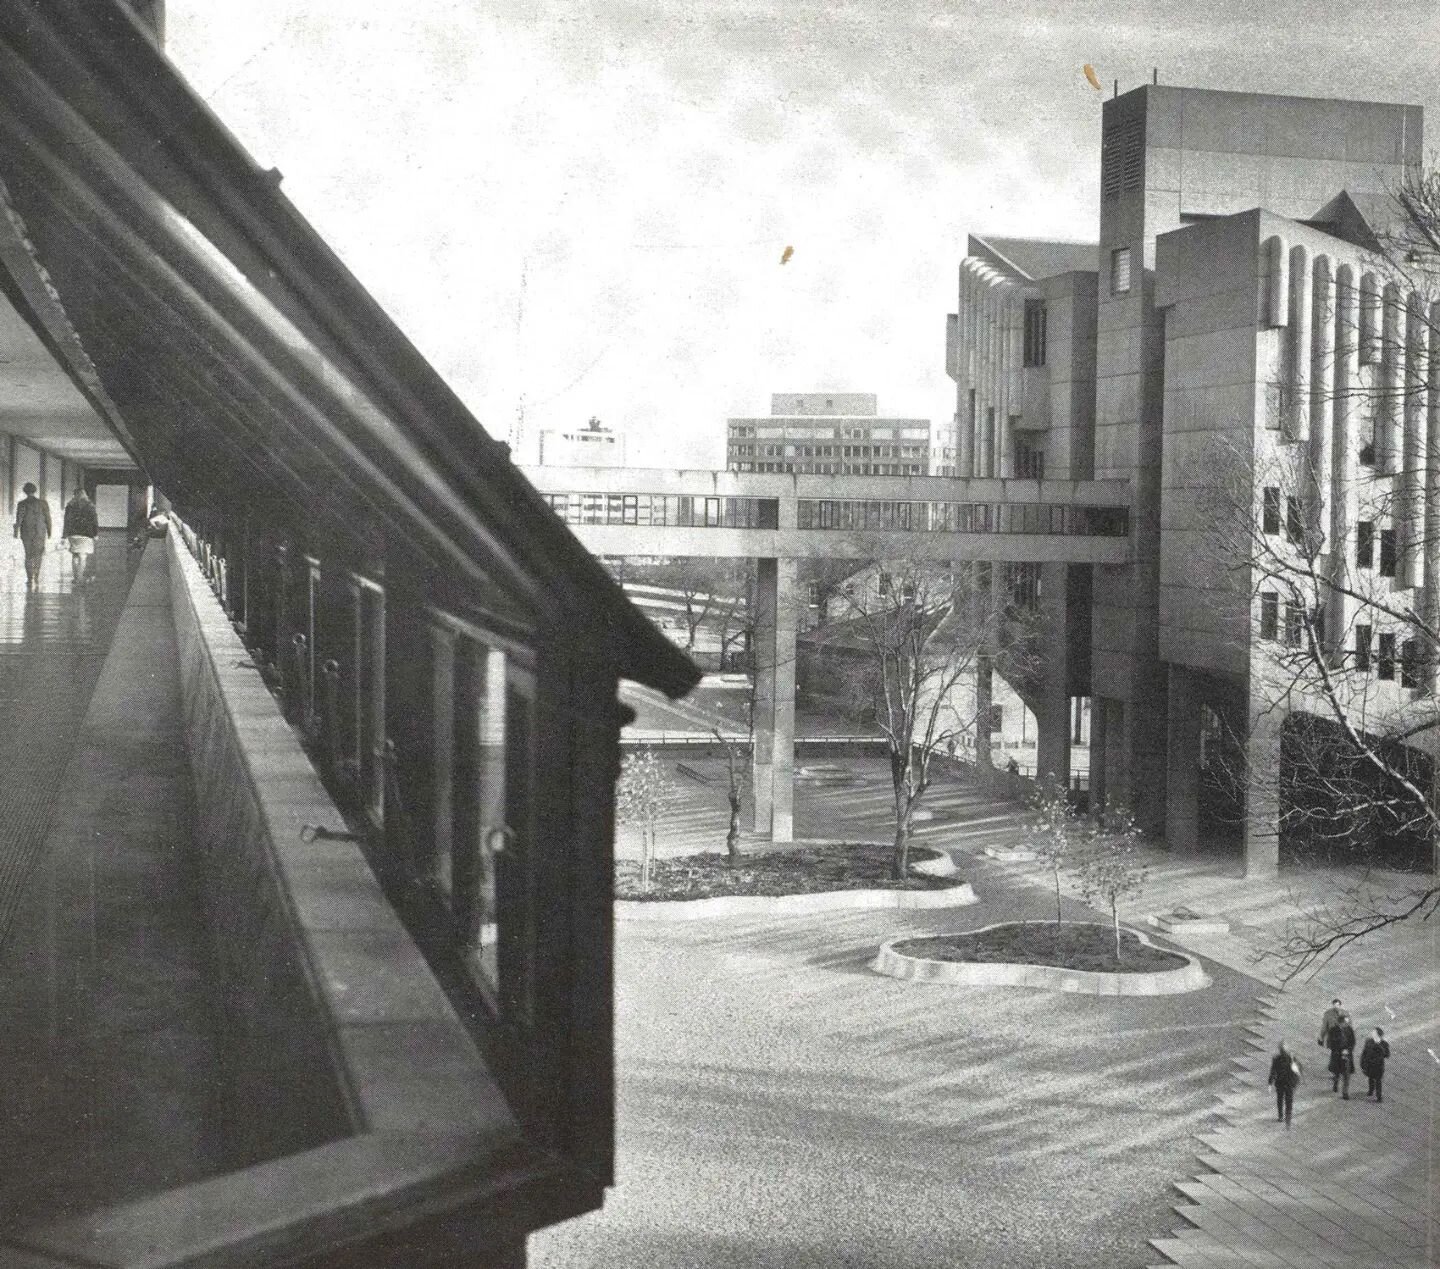 Roger Stevens Building &amp; Chancellor&rsquo;s Court from the Red Route &hearts;️ 🚨 🌶️ A high level walkway which connects 7 Chamberlin, Powell &amp; Bon buildings on the University of Leeds campus. When completed, it famously included the longest